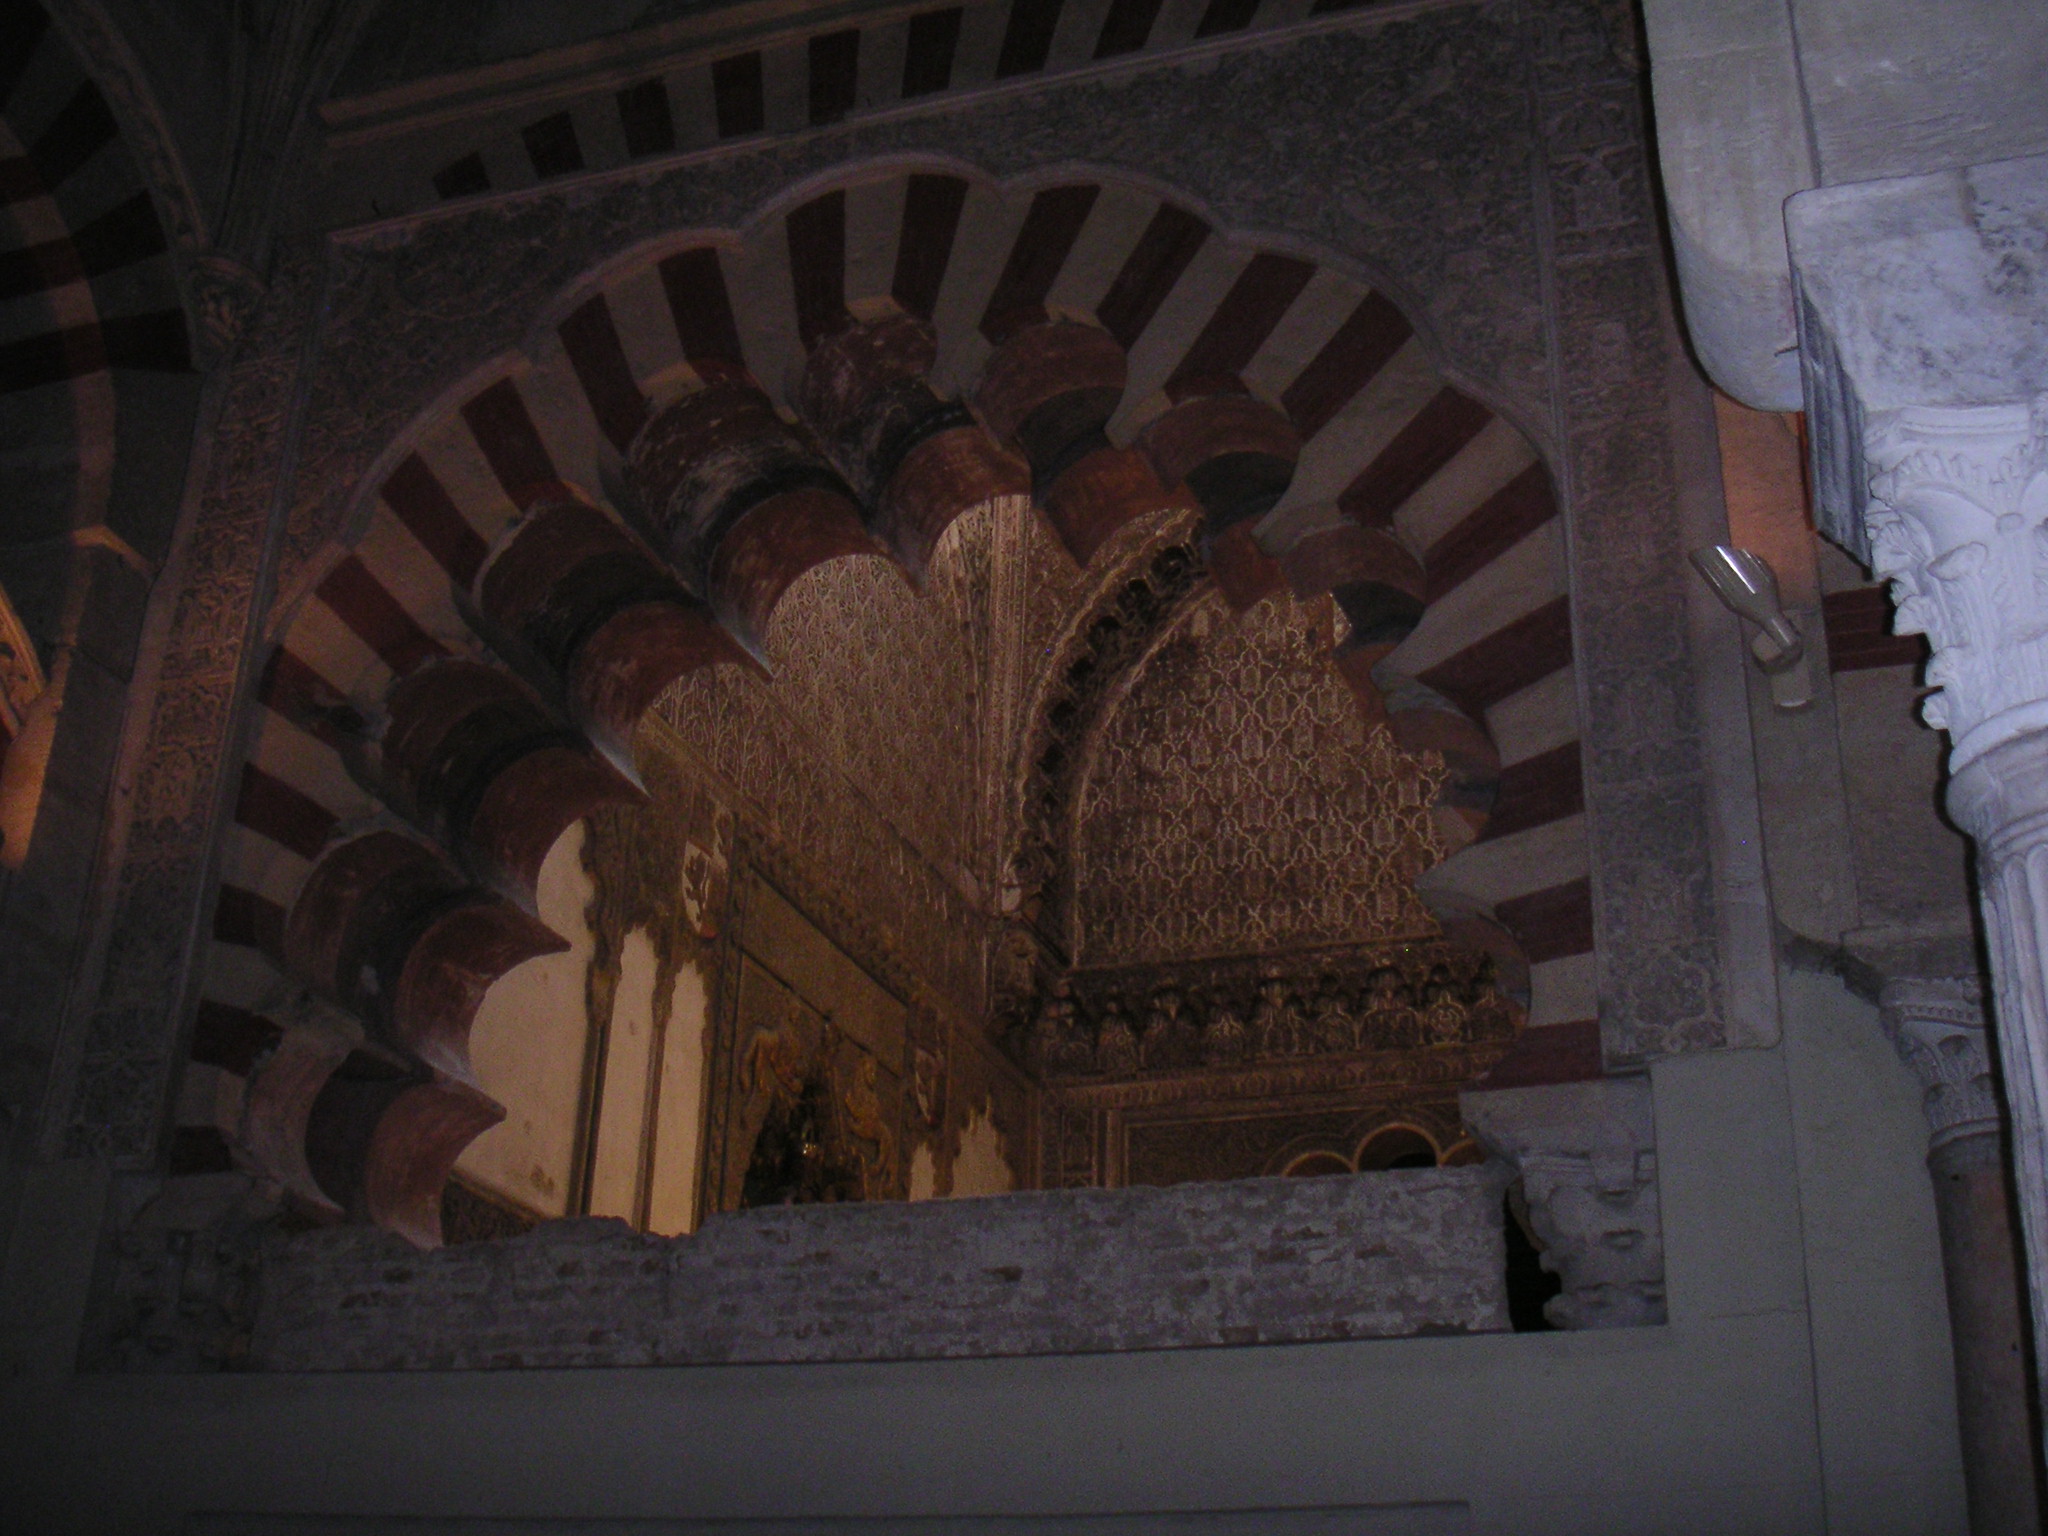 The amazing arches of the Mezquita